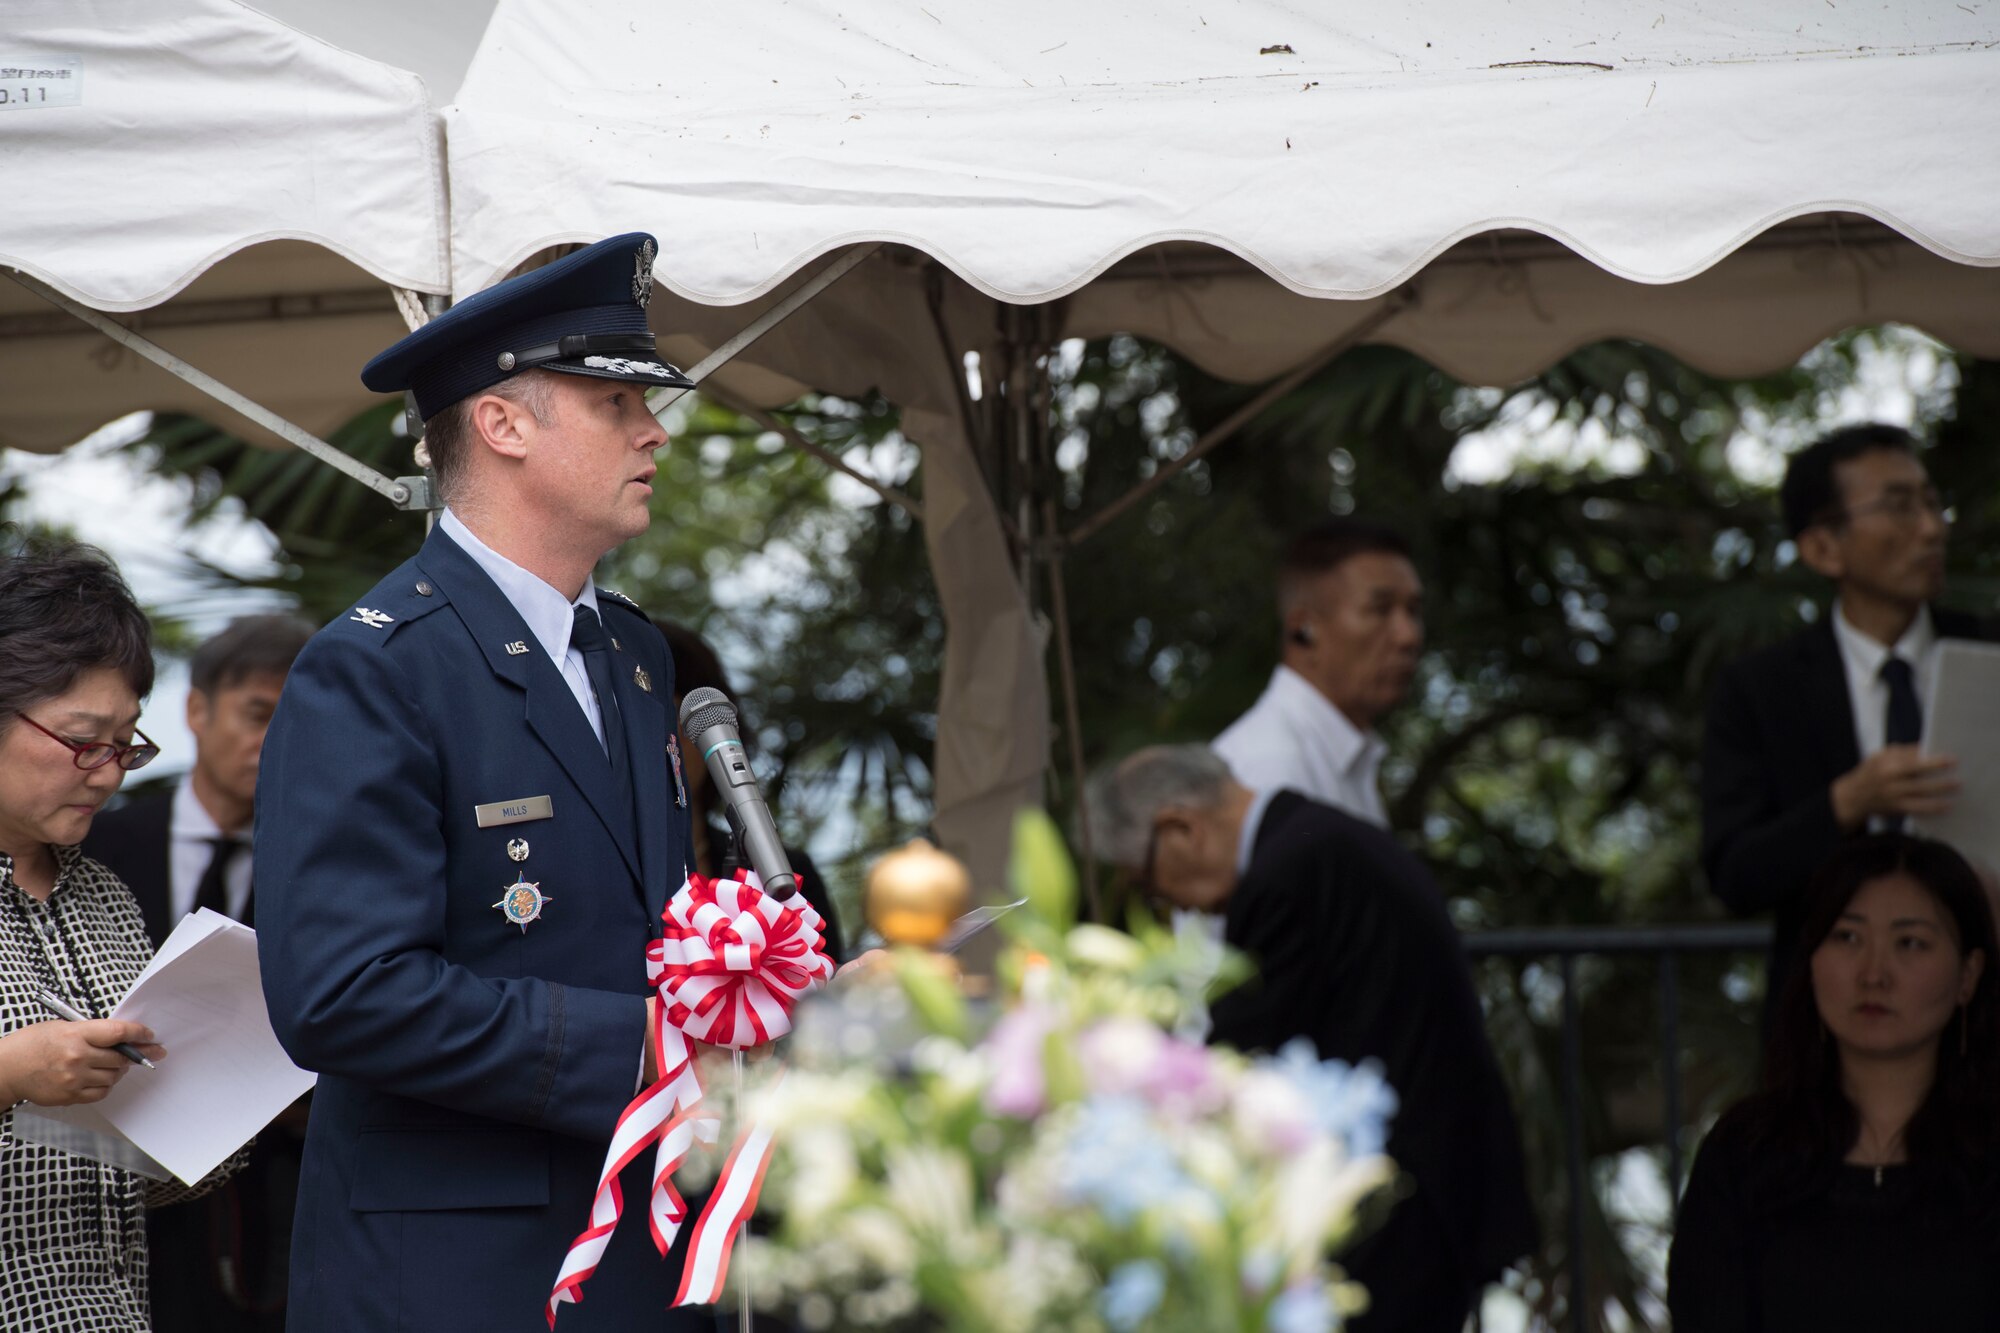 Col. Jason Mills, 374th Airlift Wing vice commander, speaks during the ceremony at Sengen Shrine in Shizuoka City, Japan, June 22, 2019.